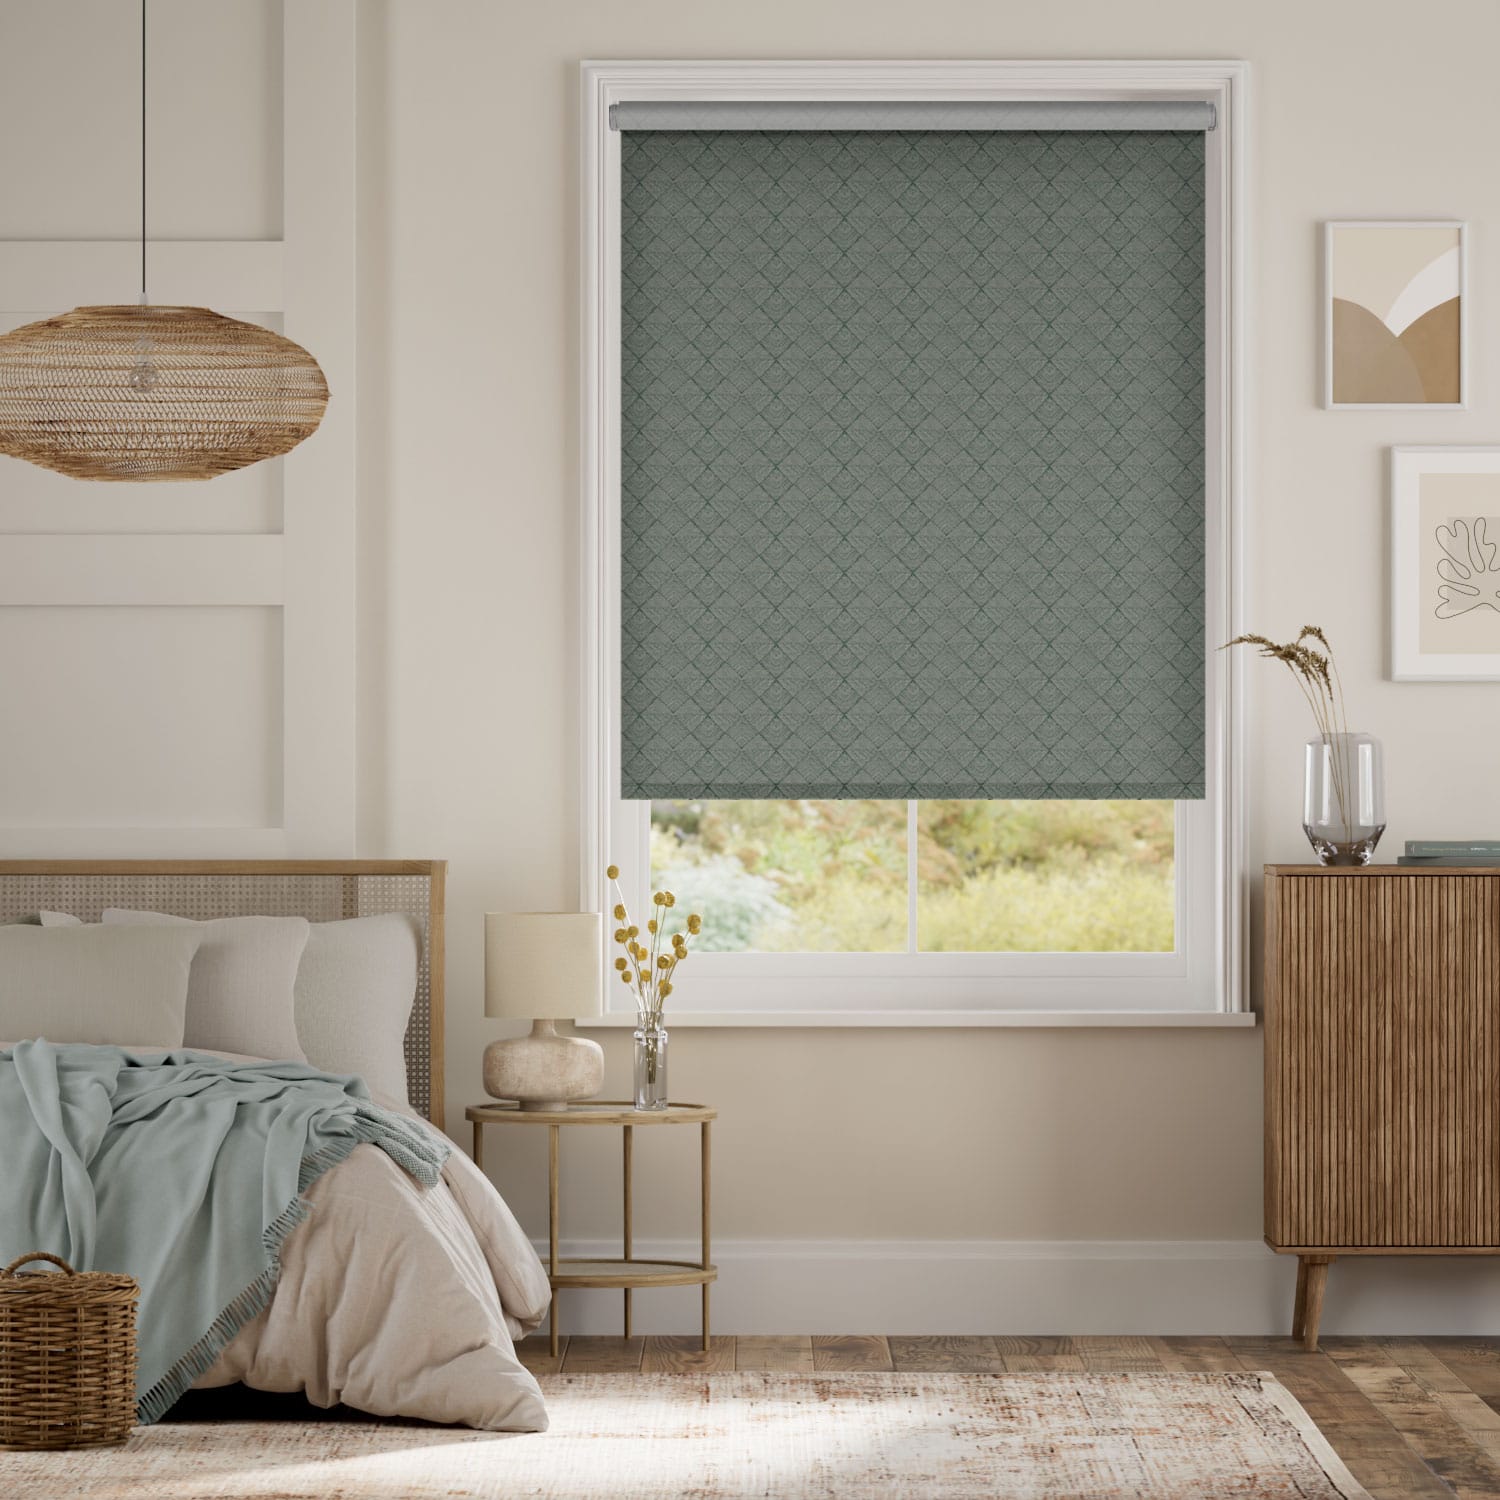 Choices Elysee Kingfisher Roller Blind